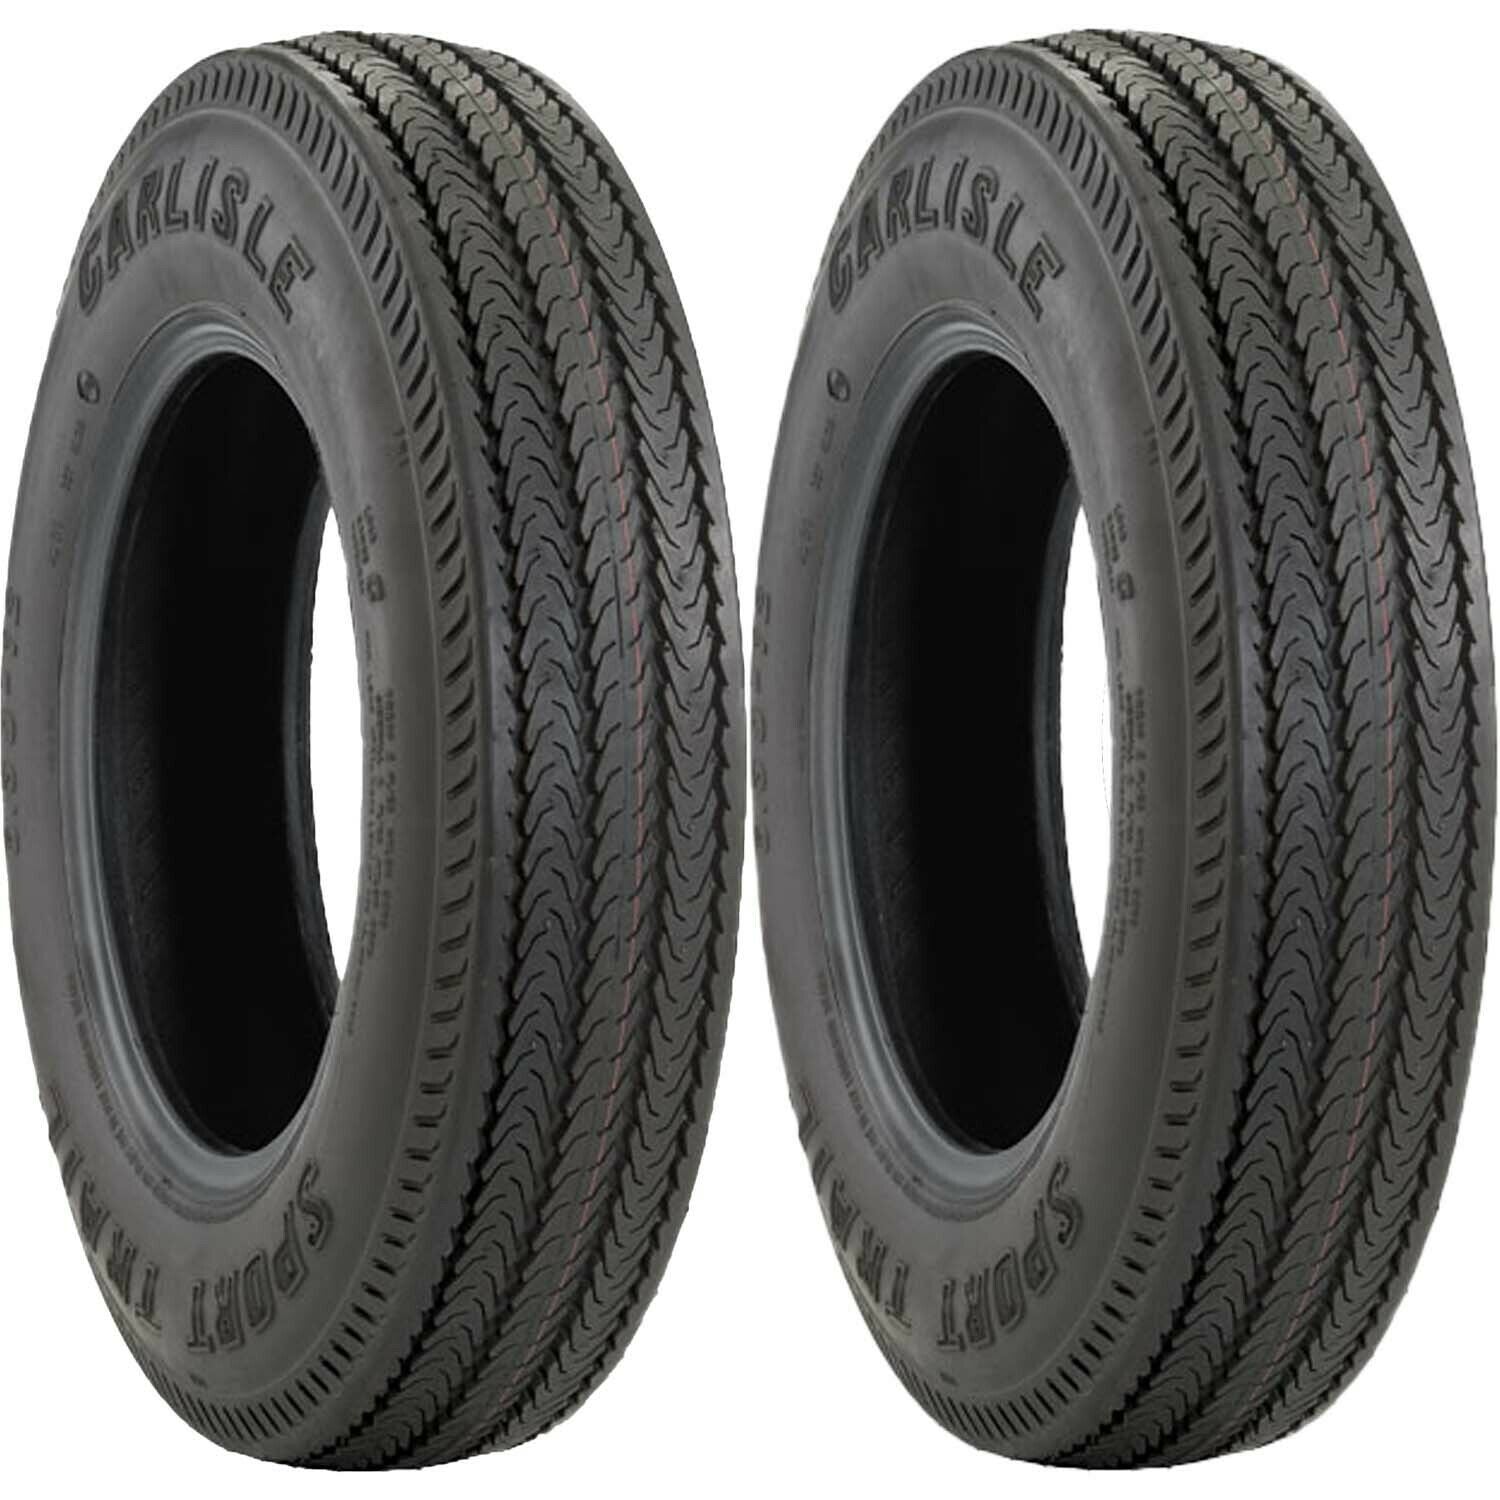 Carlisle Sport Trail Trailer Tire LRC 6Ply 4.80-8 Pack of 2